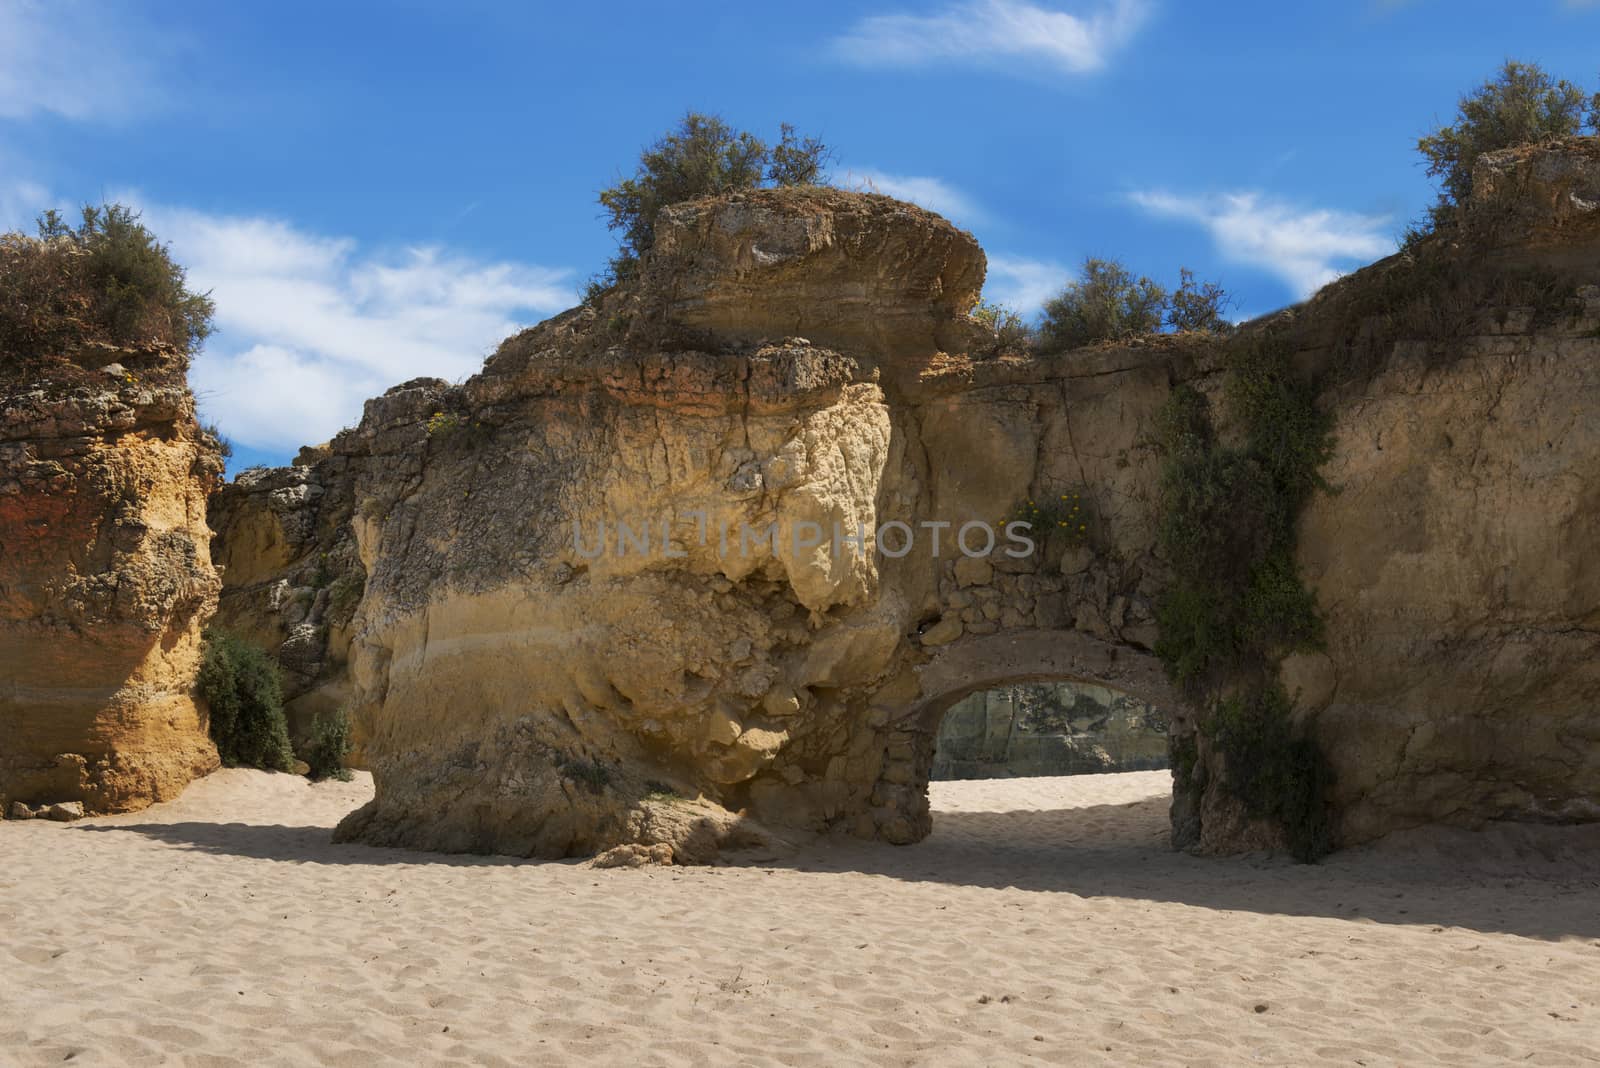 rocks and cliff in algarve city lagos in Portugal, the most beautifull coastline of the world seen from the beach